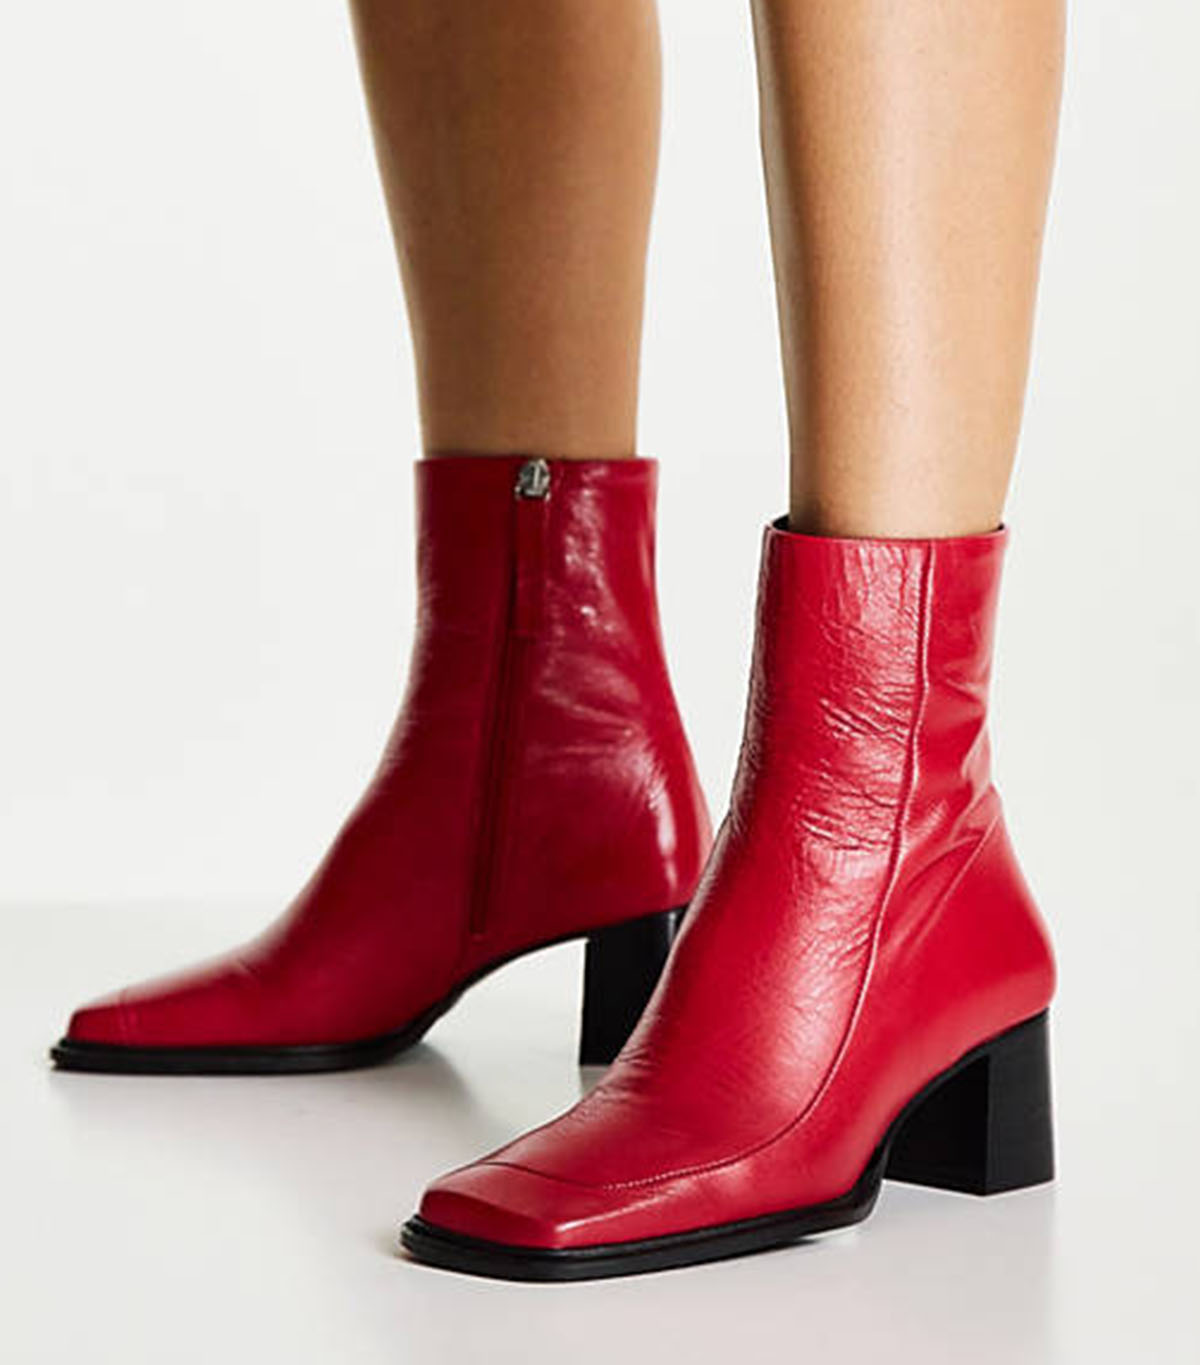 Red Boots That Are So Stylish in 2021 ...